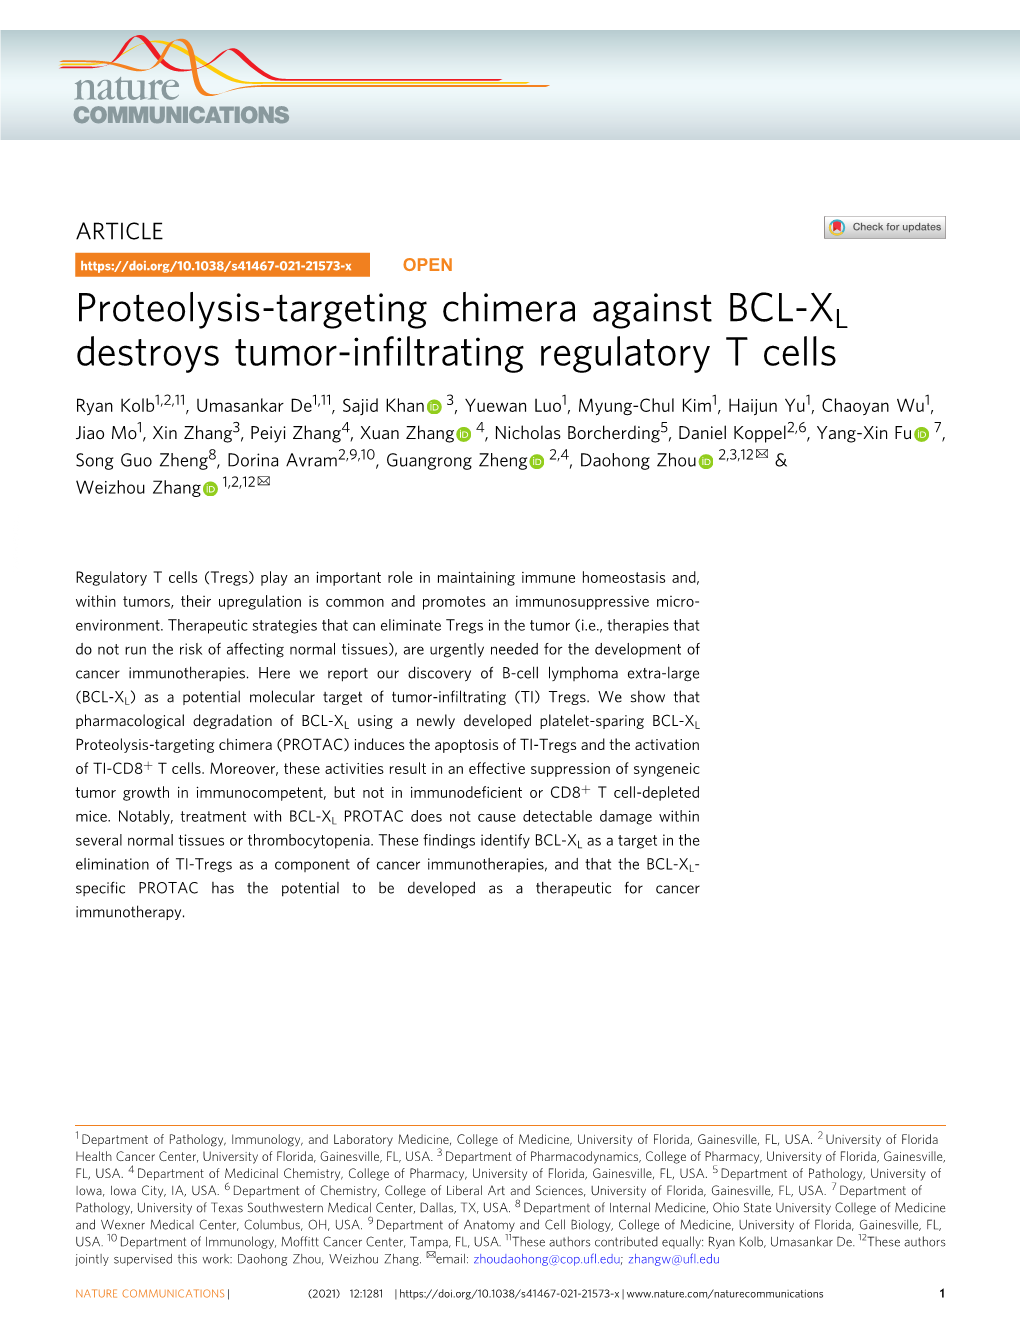 Proteolysis-Targeting Chimera Against BCL-XL Destroys Tumor-Infiltrating